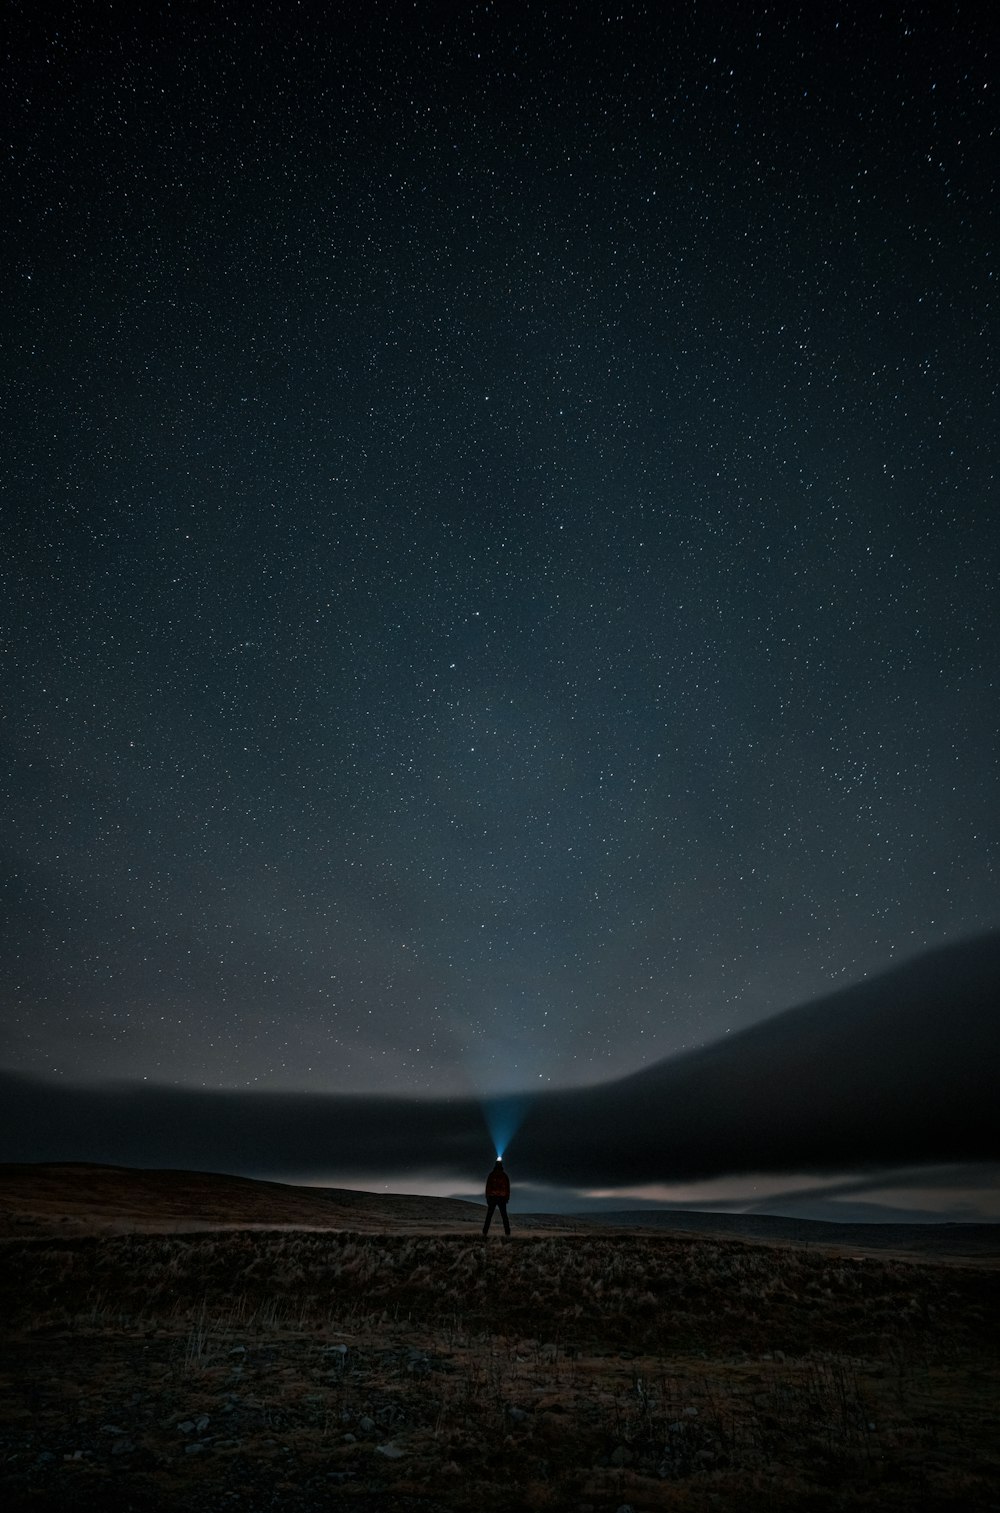 a person standing in the middle of a field under a night sky